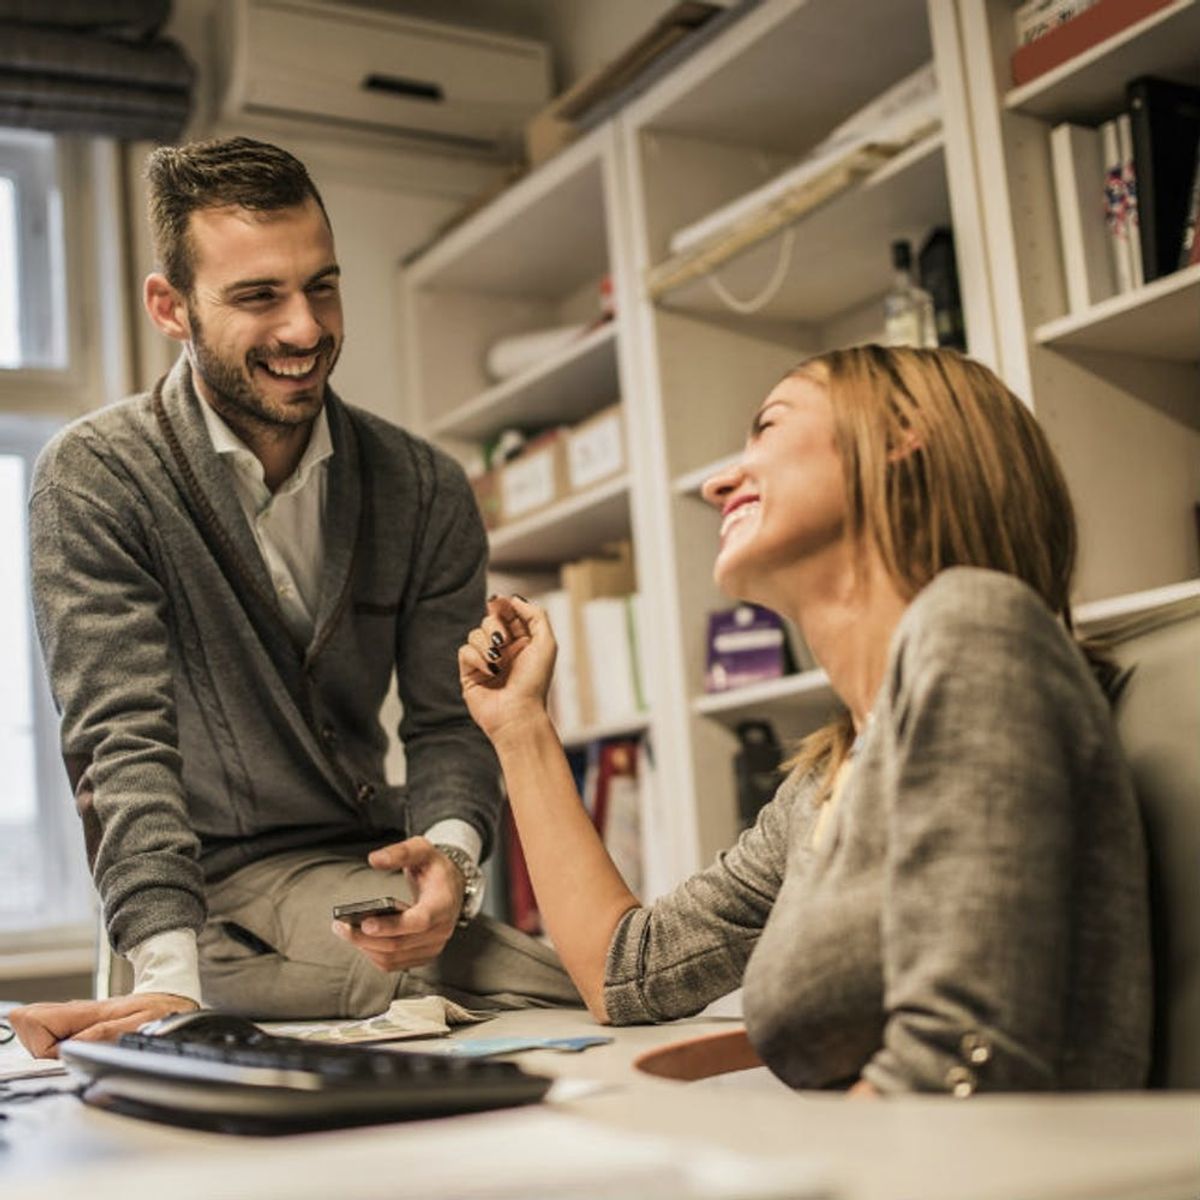 This Study Shows Workplace Romance Is Alive and Well